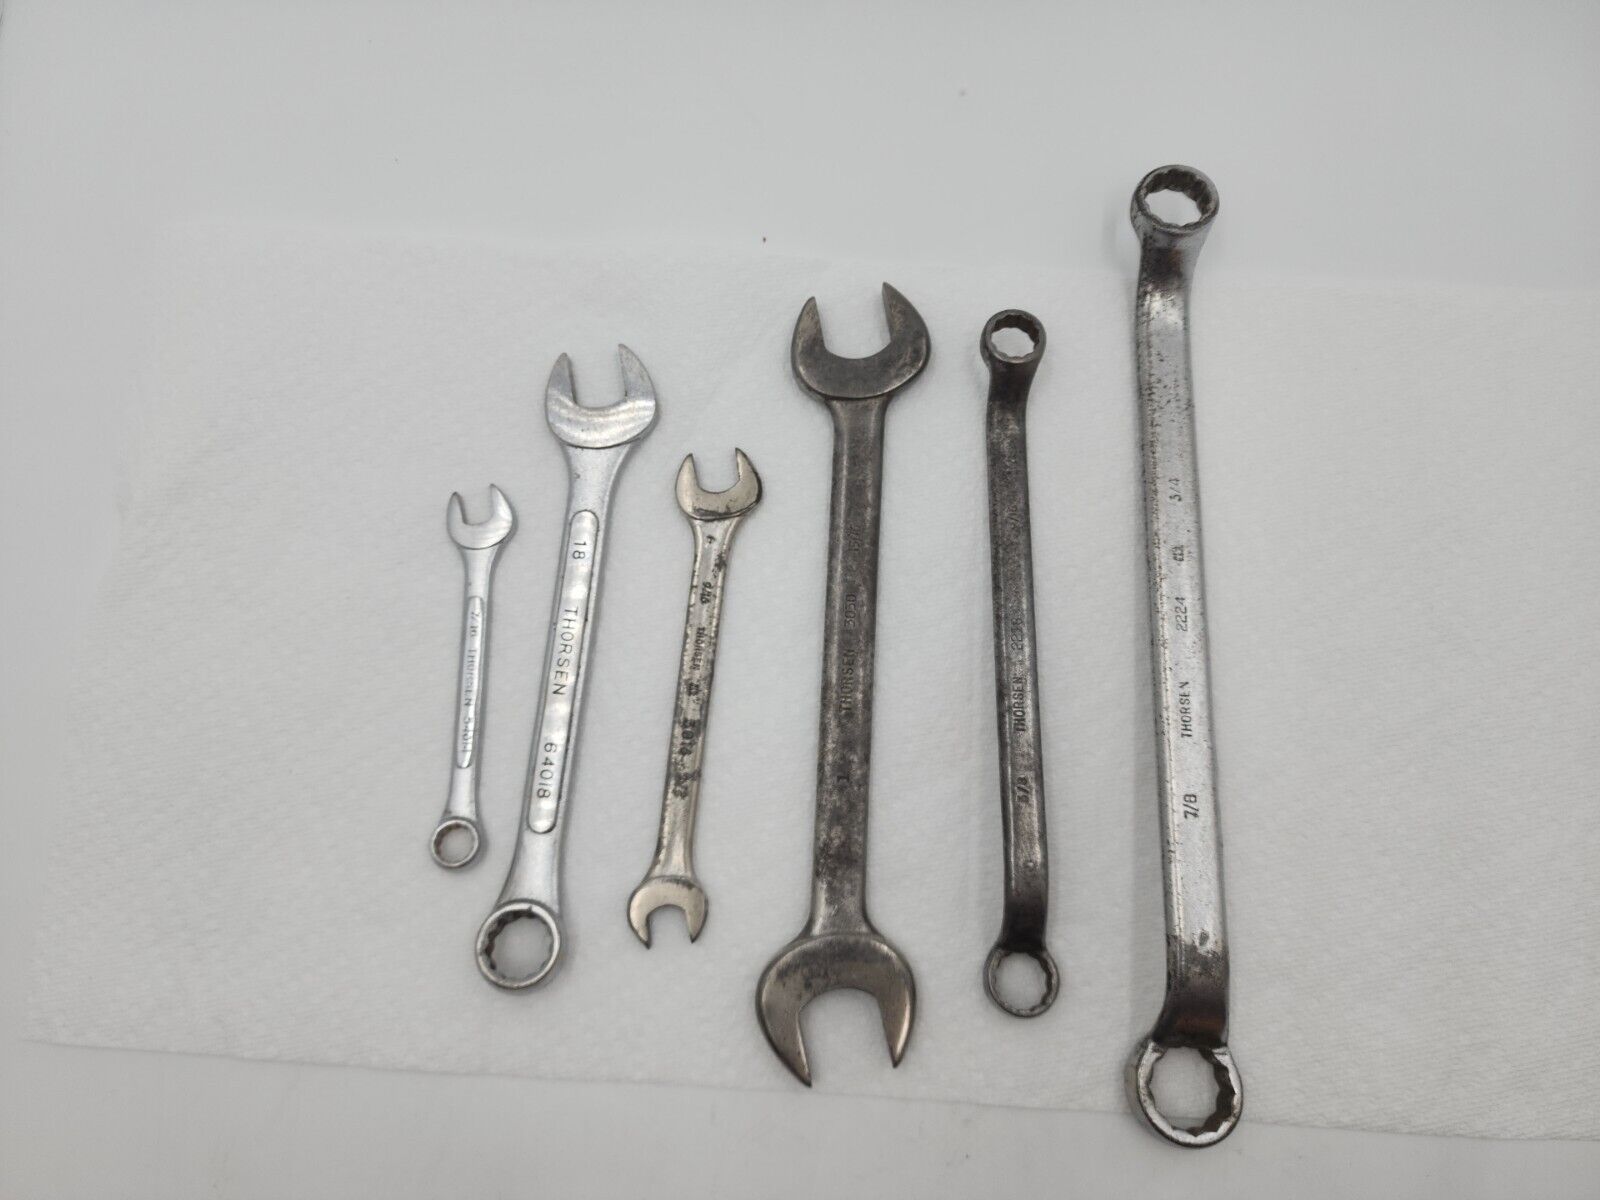 THORSEN 6 pc Combination/Open/Box End Wrench Lot 2224,2216,3030,3016,54014,64018